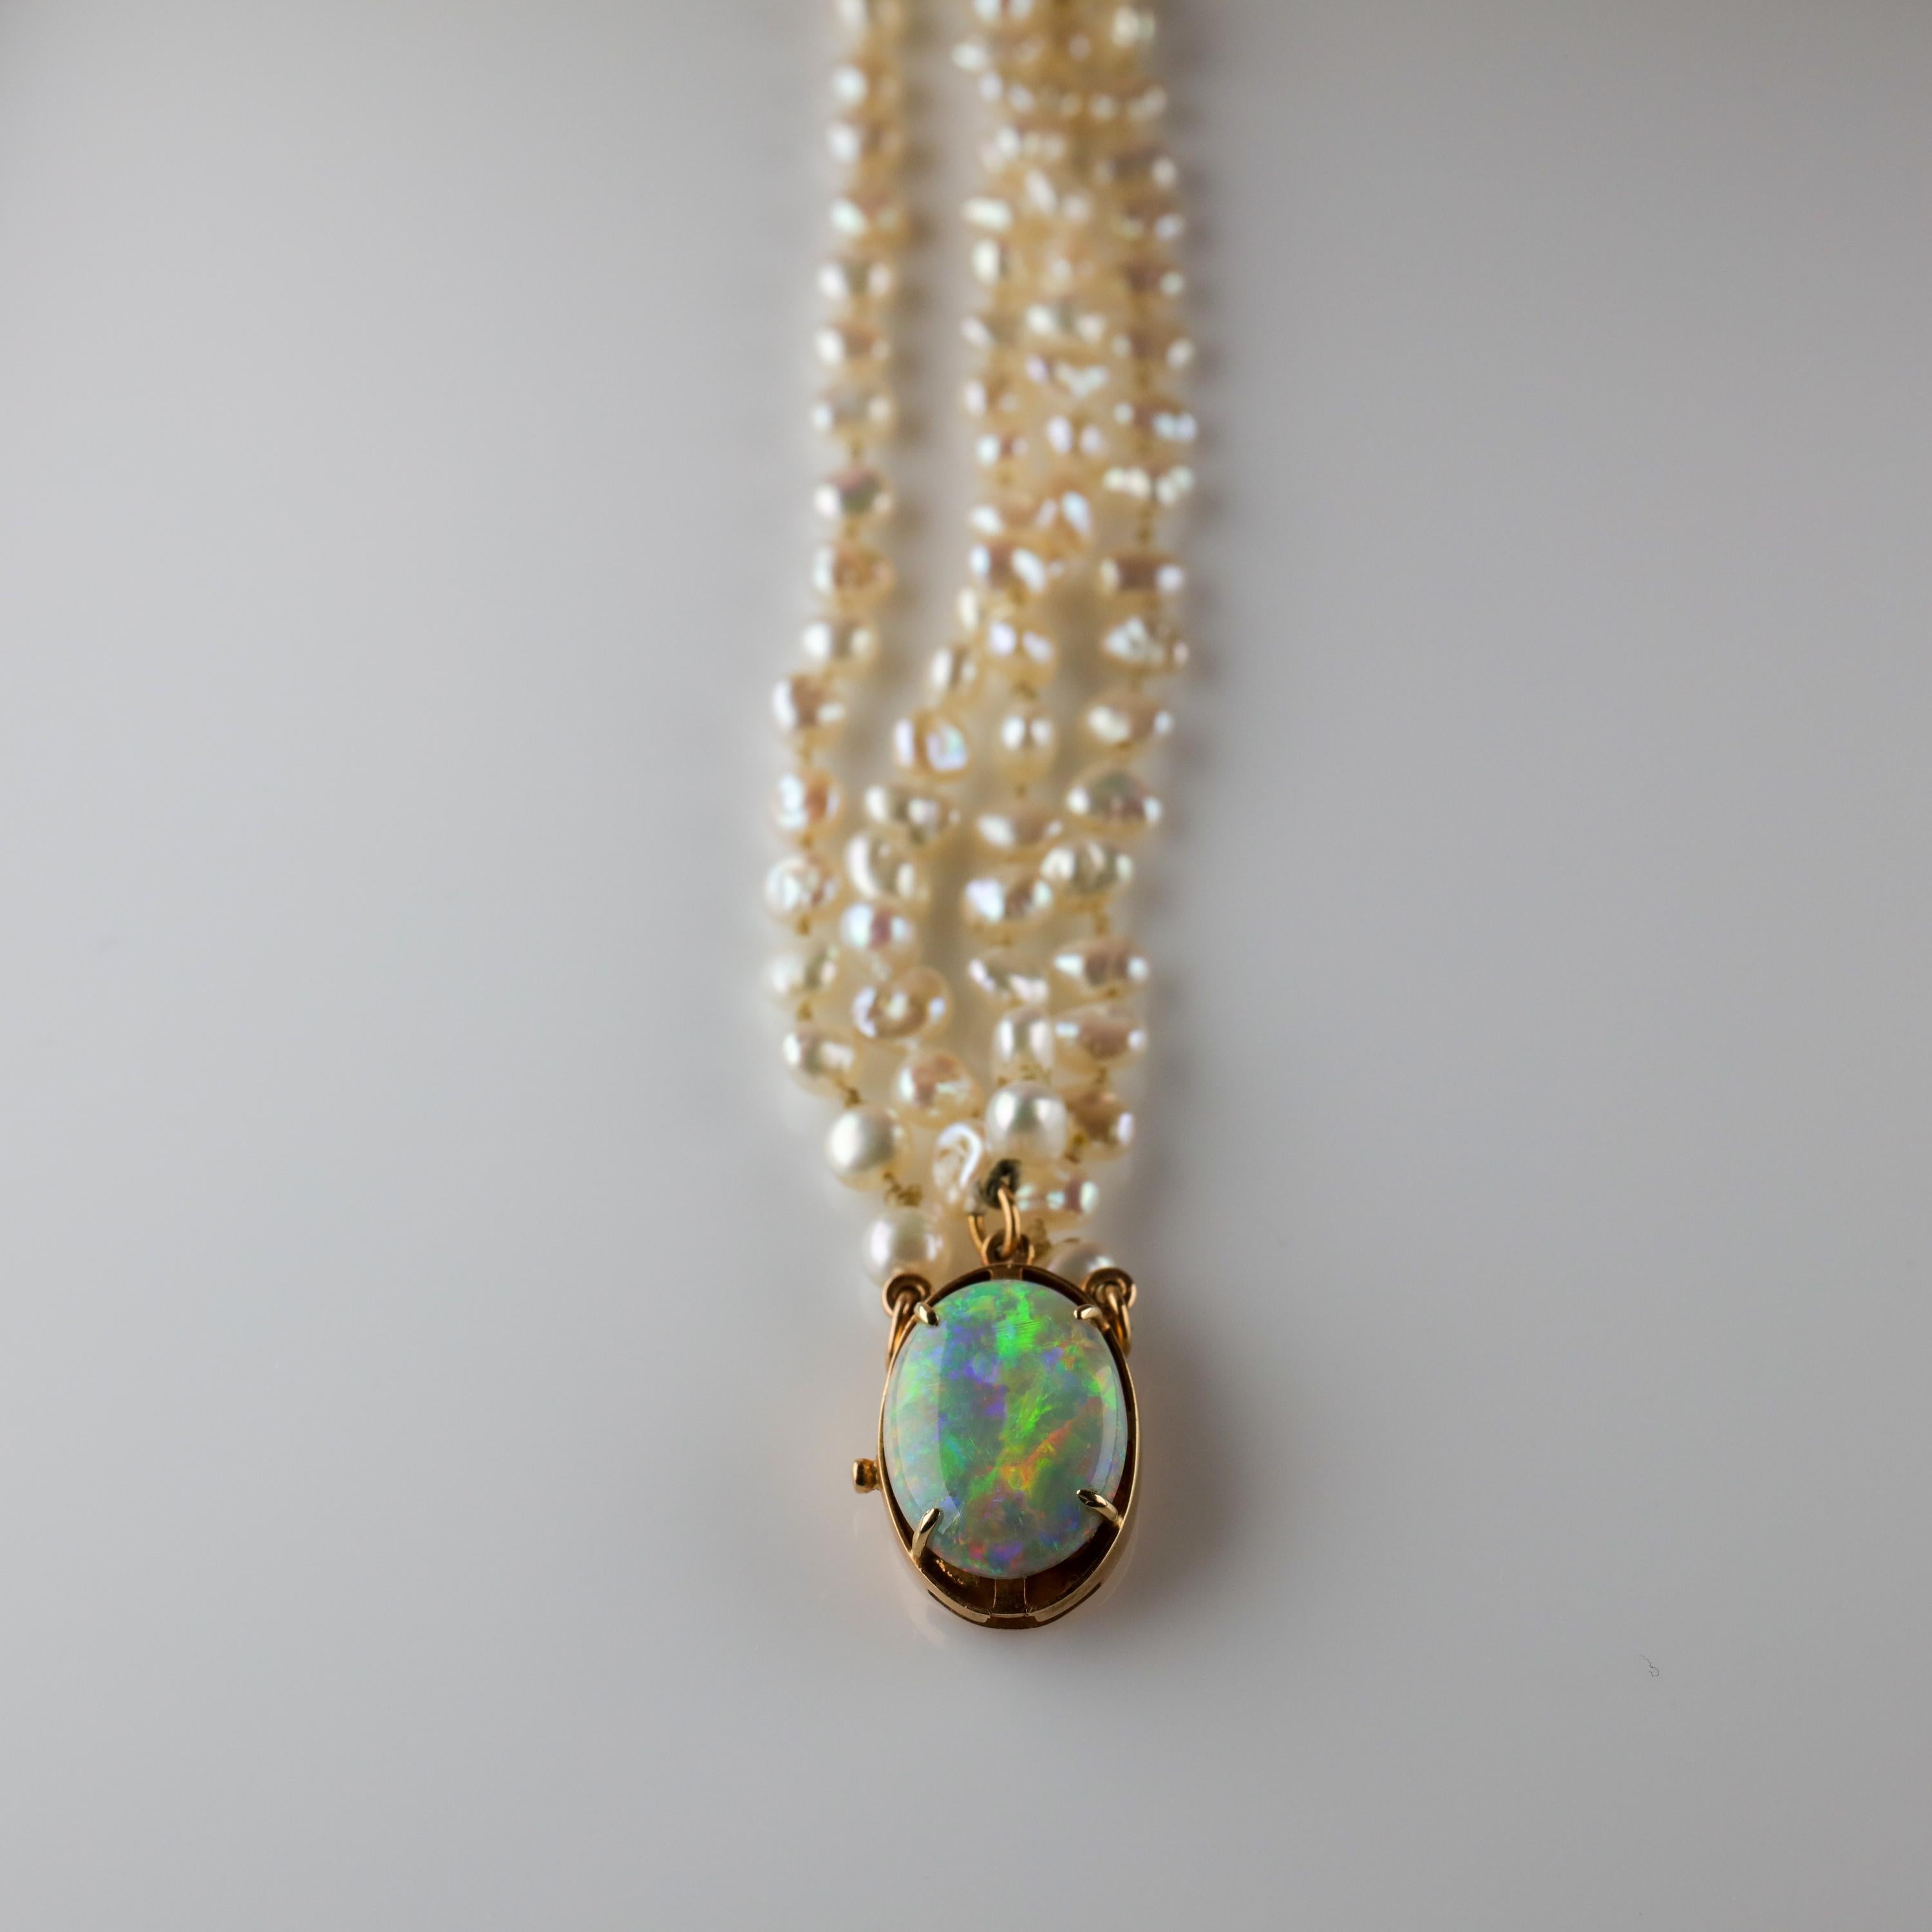 Gump's Pearl and Opal Necklace Features Rare & Authentic Biwa Pearls 4